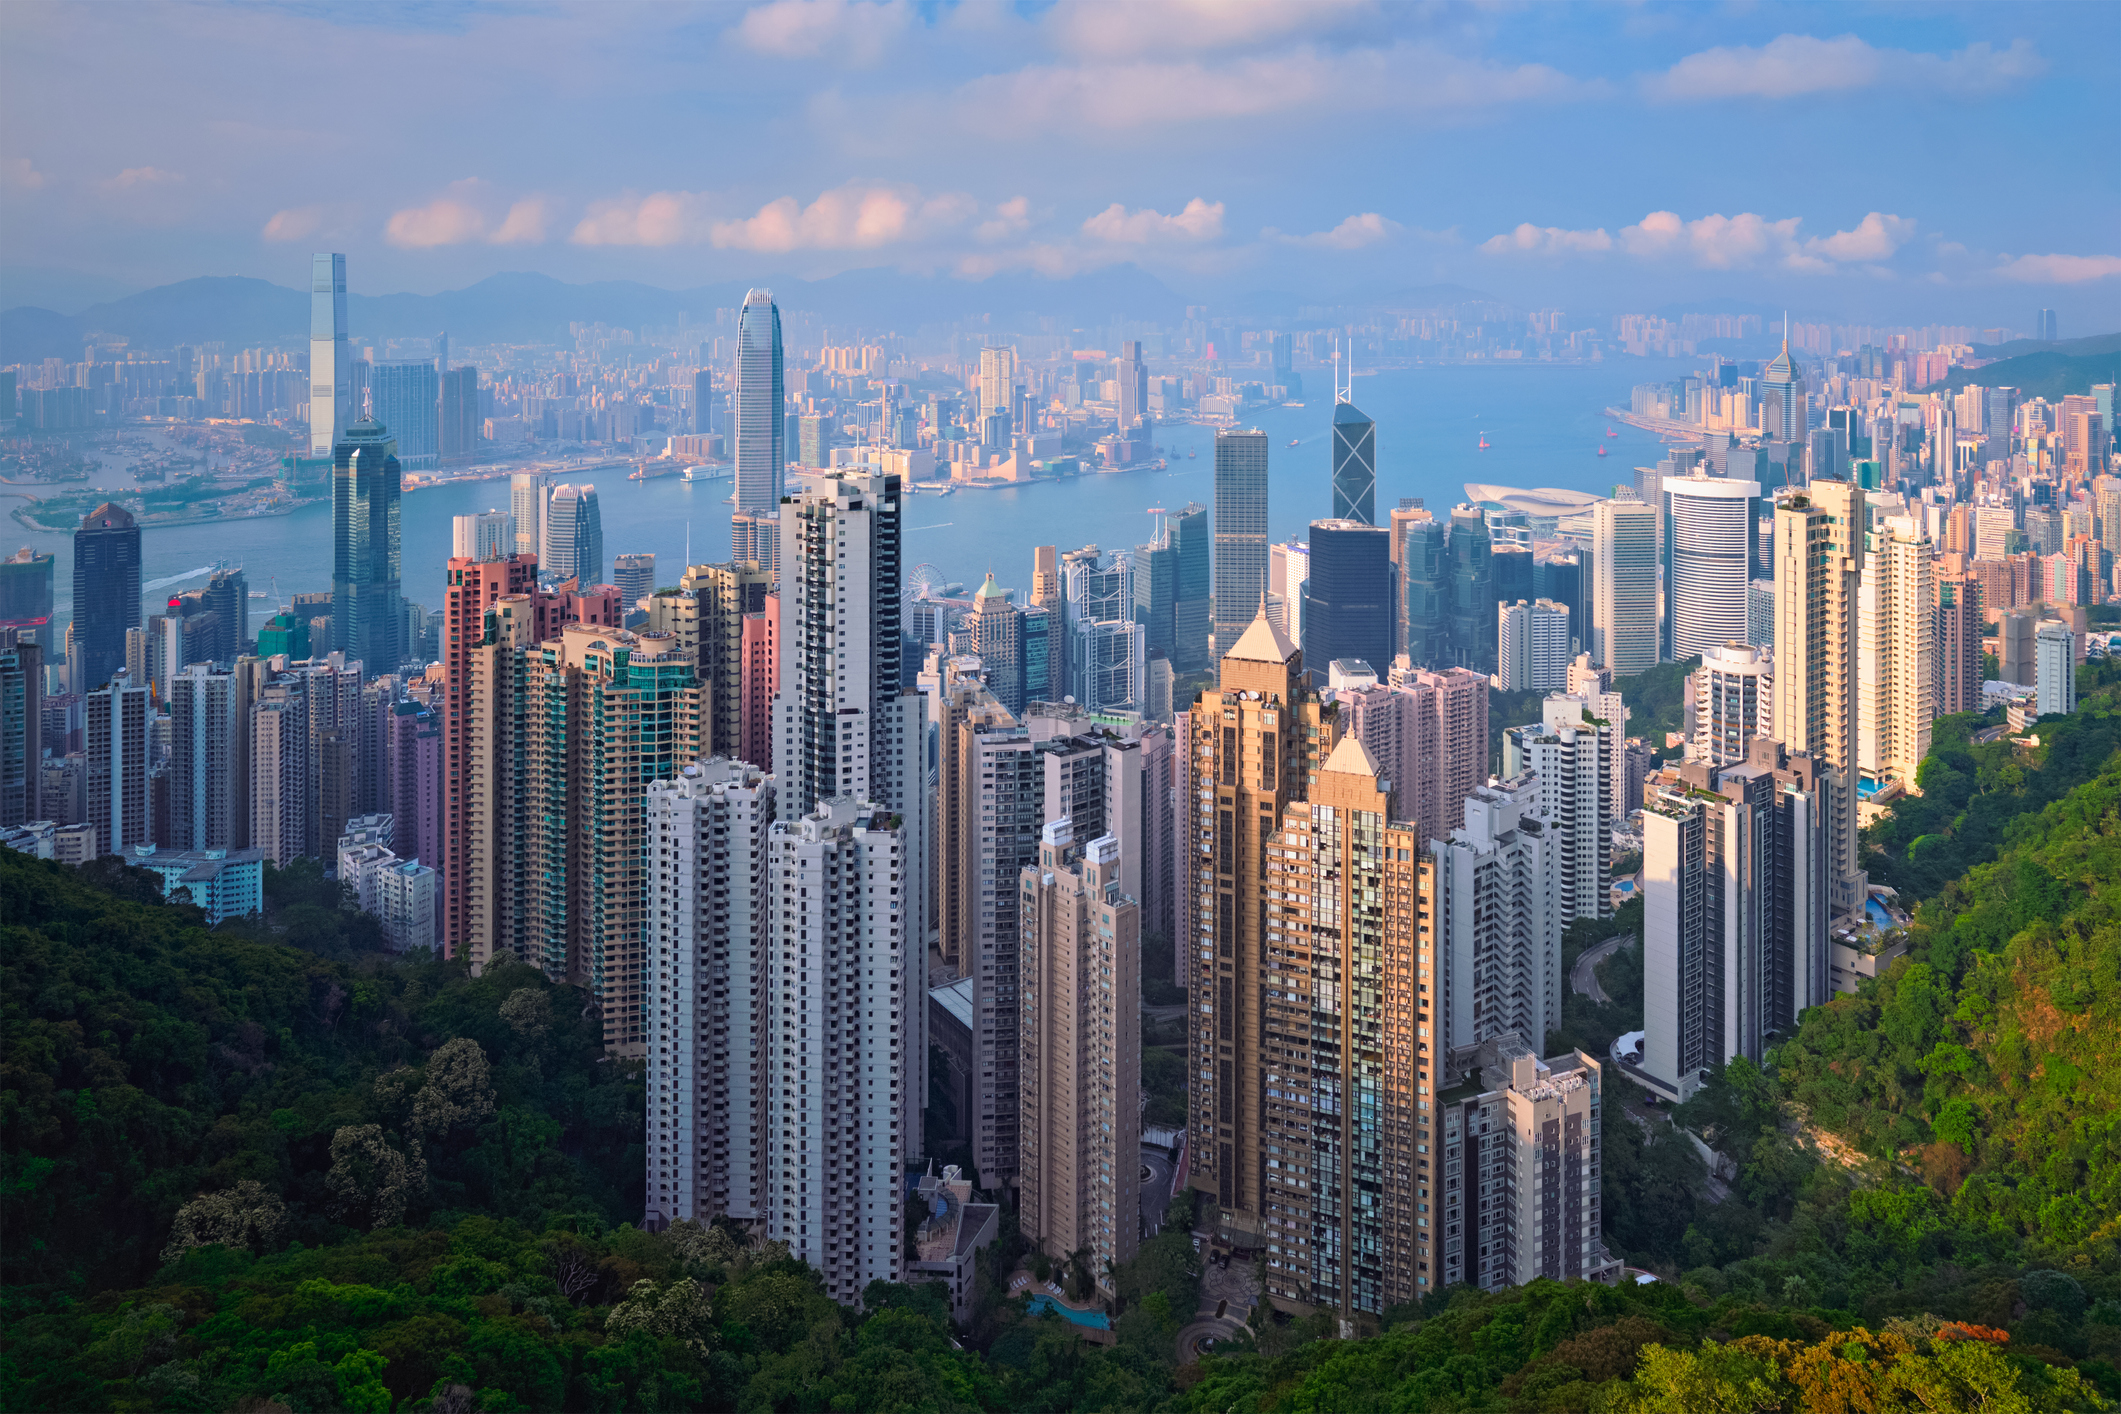 A view of the Hong Kong skyline